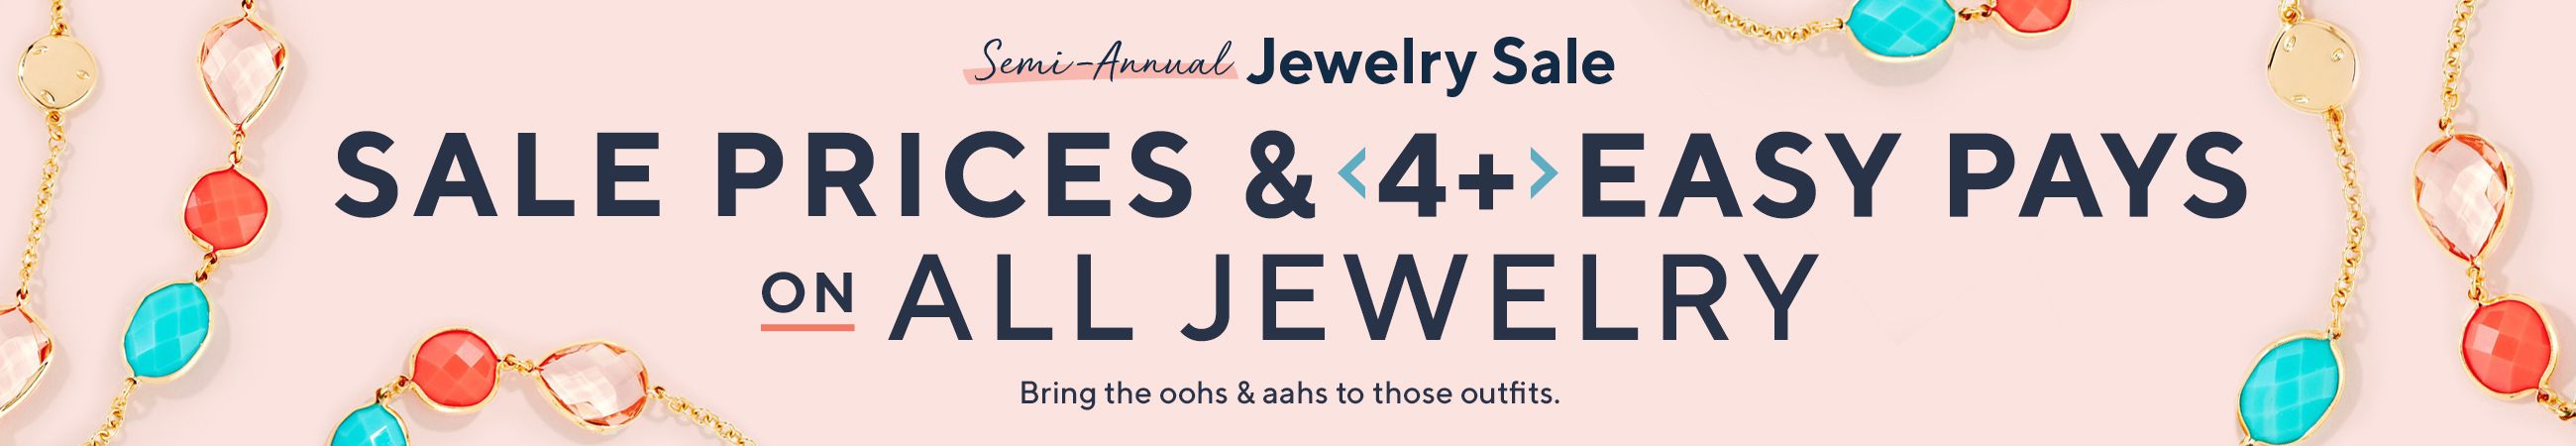 Semi-Annual Jewelry Sale - Sale Prices & 4 or more Easy Pays on All Jewelry - Bring the oohs & aahs to those outfits.